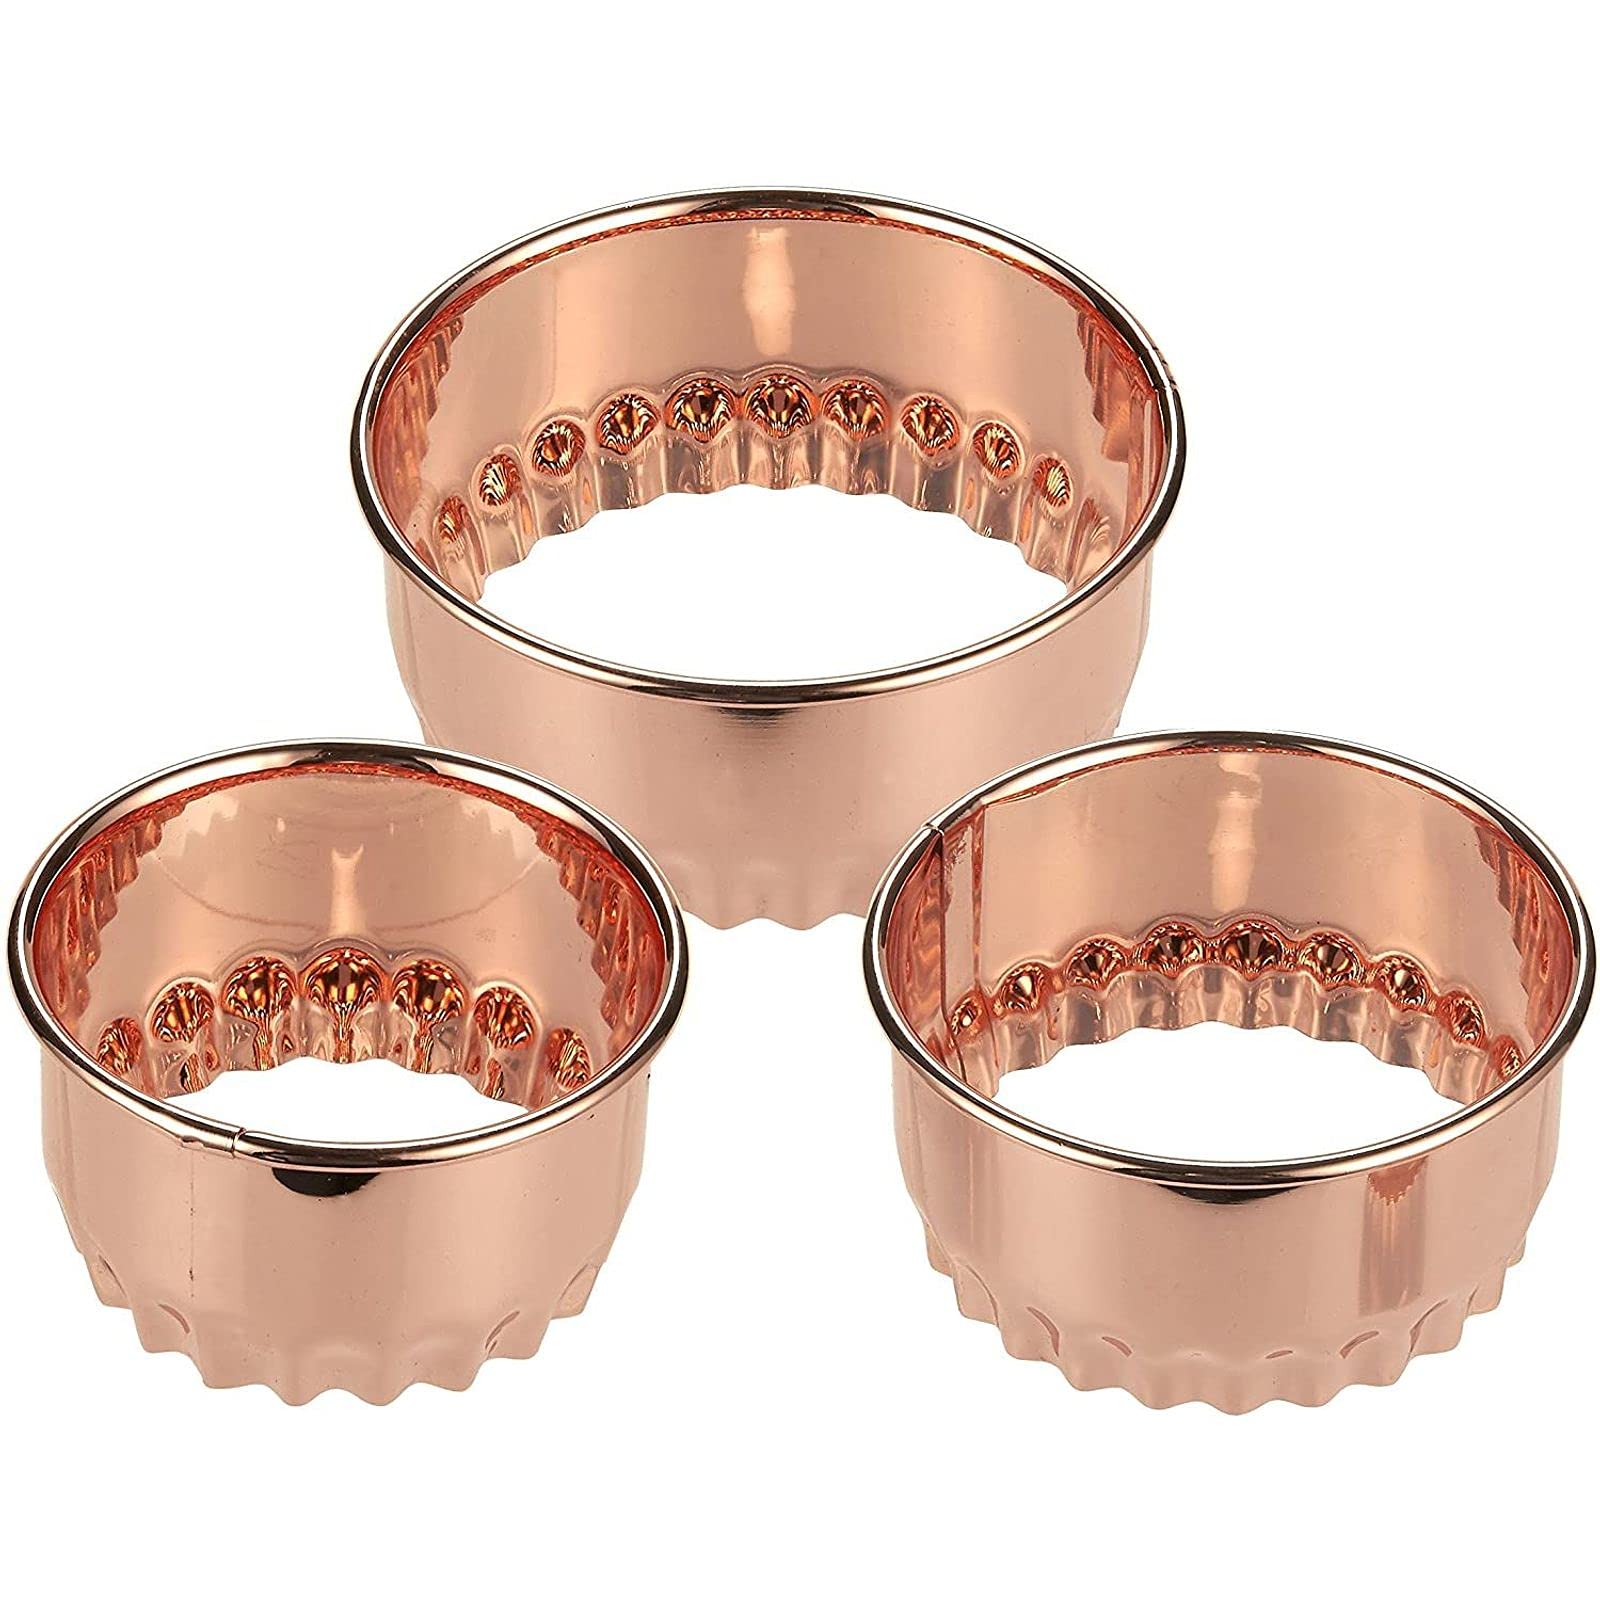 Two-Sided Copper Cookie Cutter Set for Pastries, Baking, Desserts (3 Pieces)